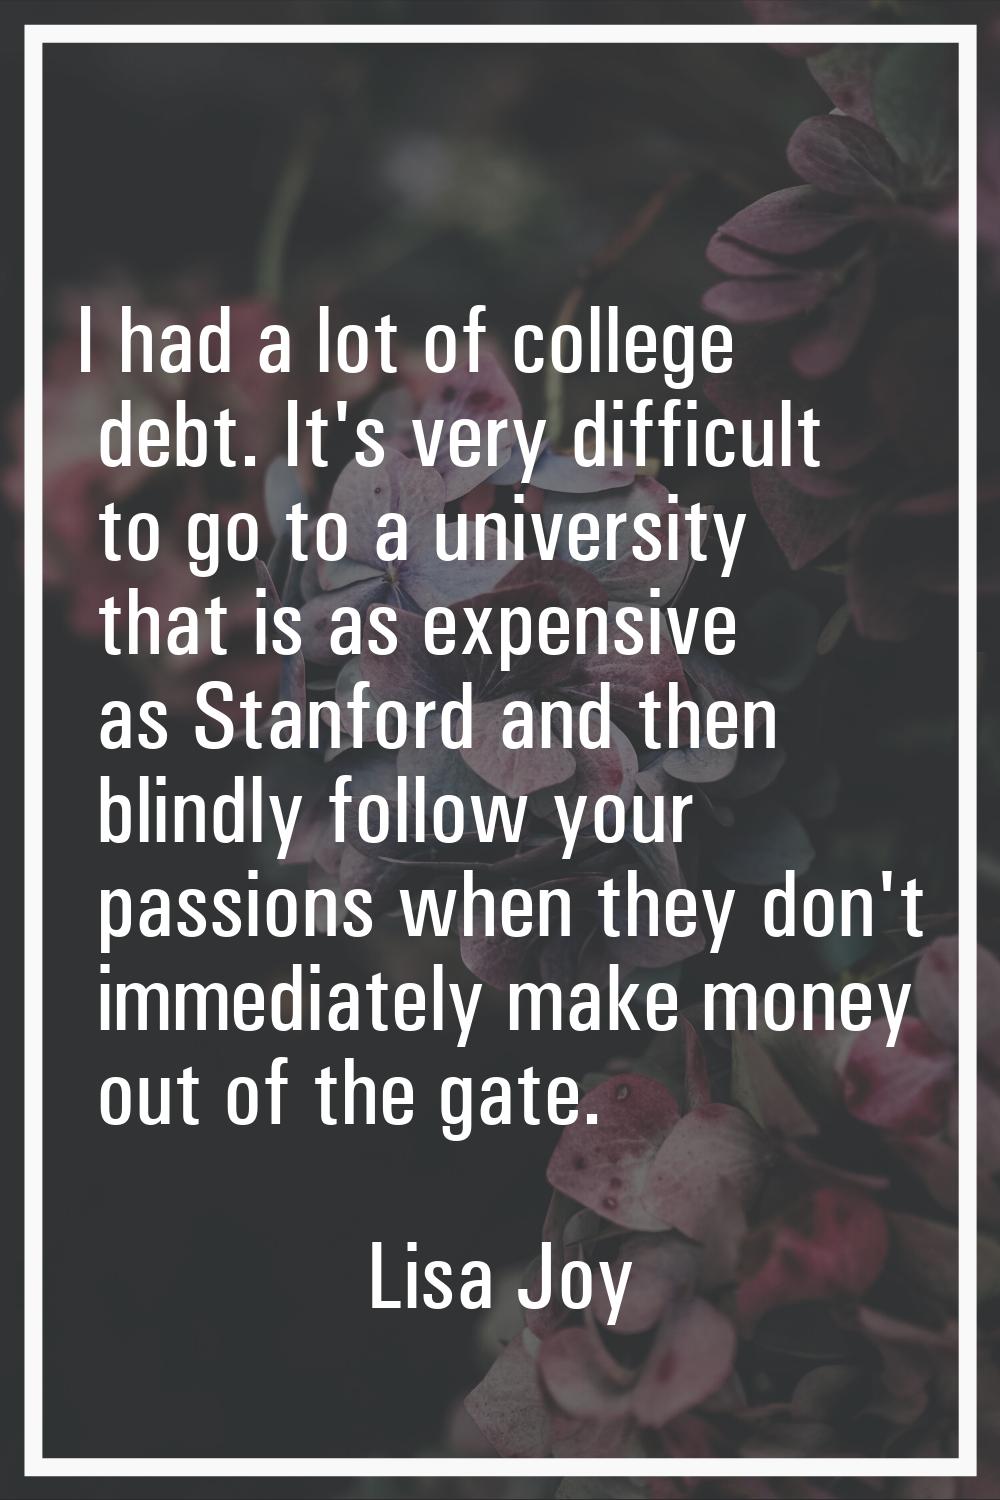 I had a lot of college debt. It's very difficult to go to a university that is as expensive as Stan